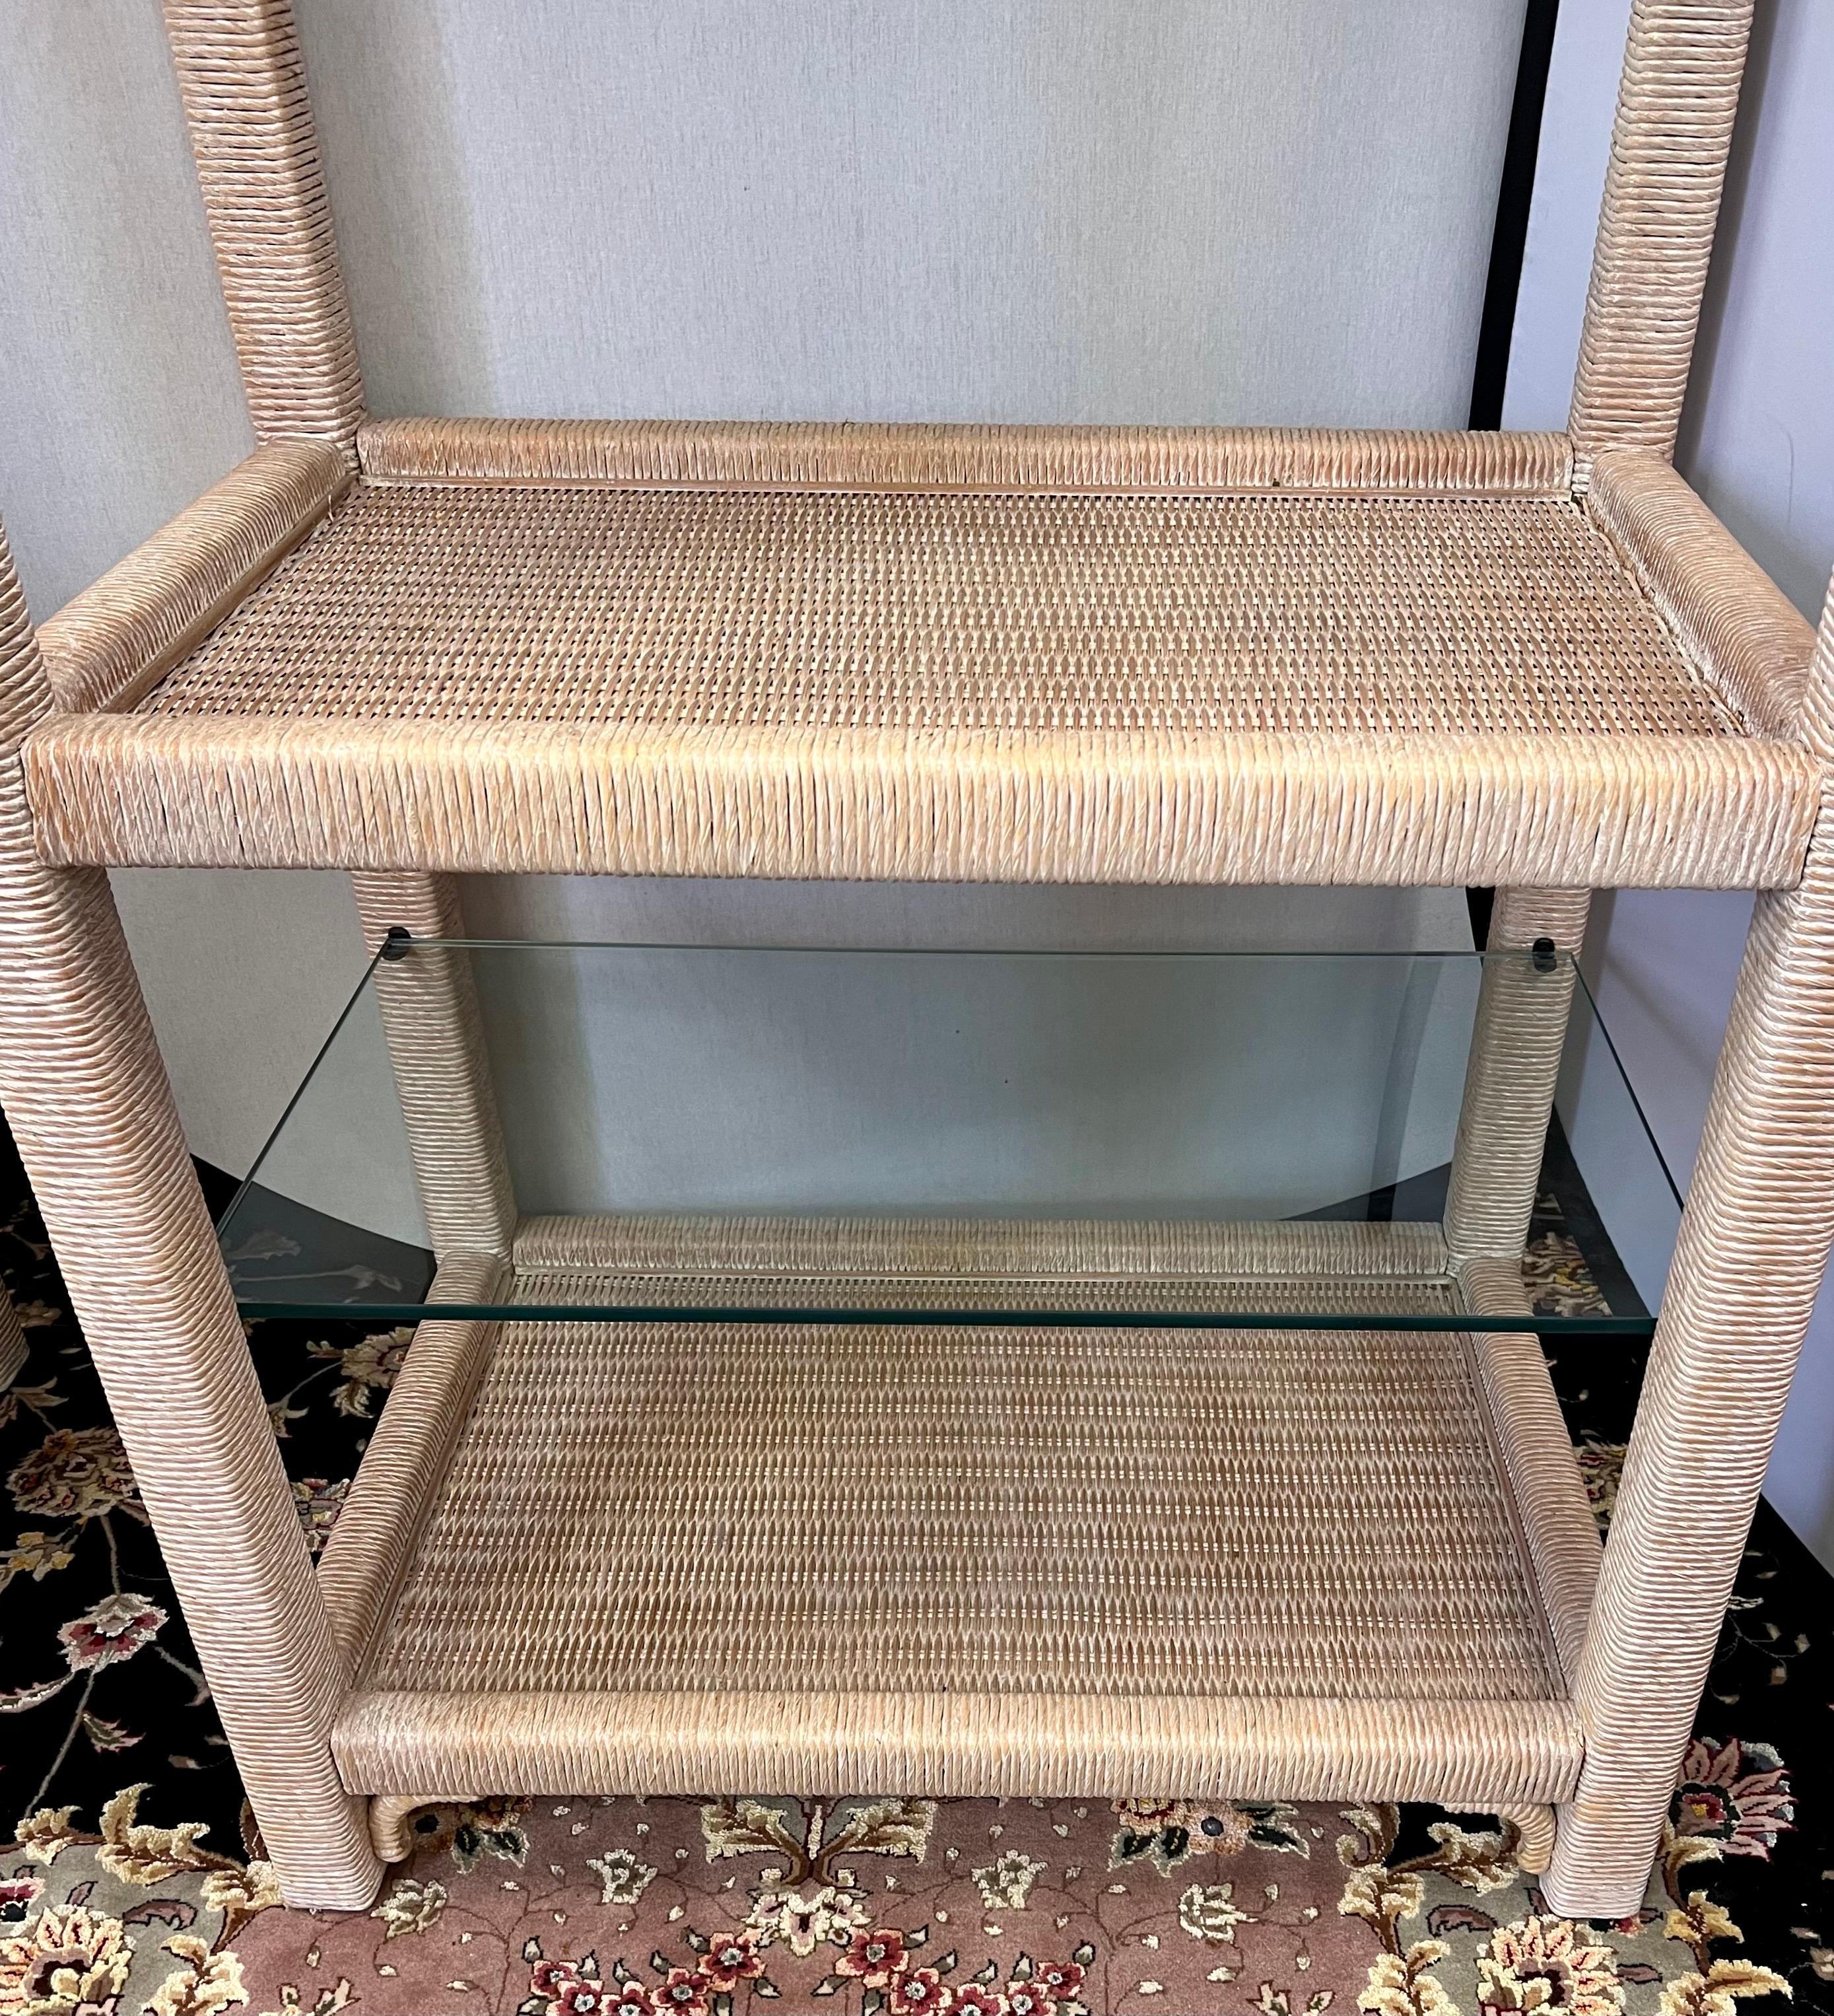 Henry Link wicker wrapped etagere with glass shelves on top. Has light at top to illuminate your collectibles from above.
See our other listings for two more Henry Link etageres.